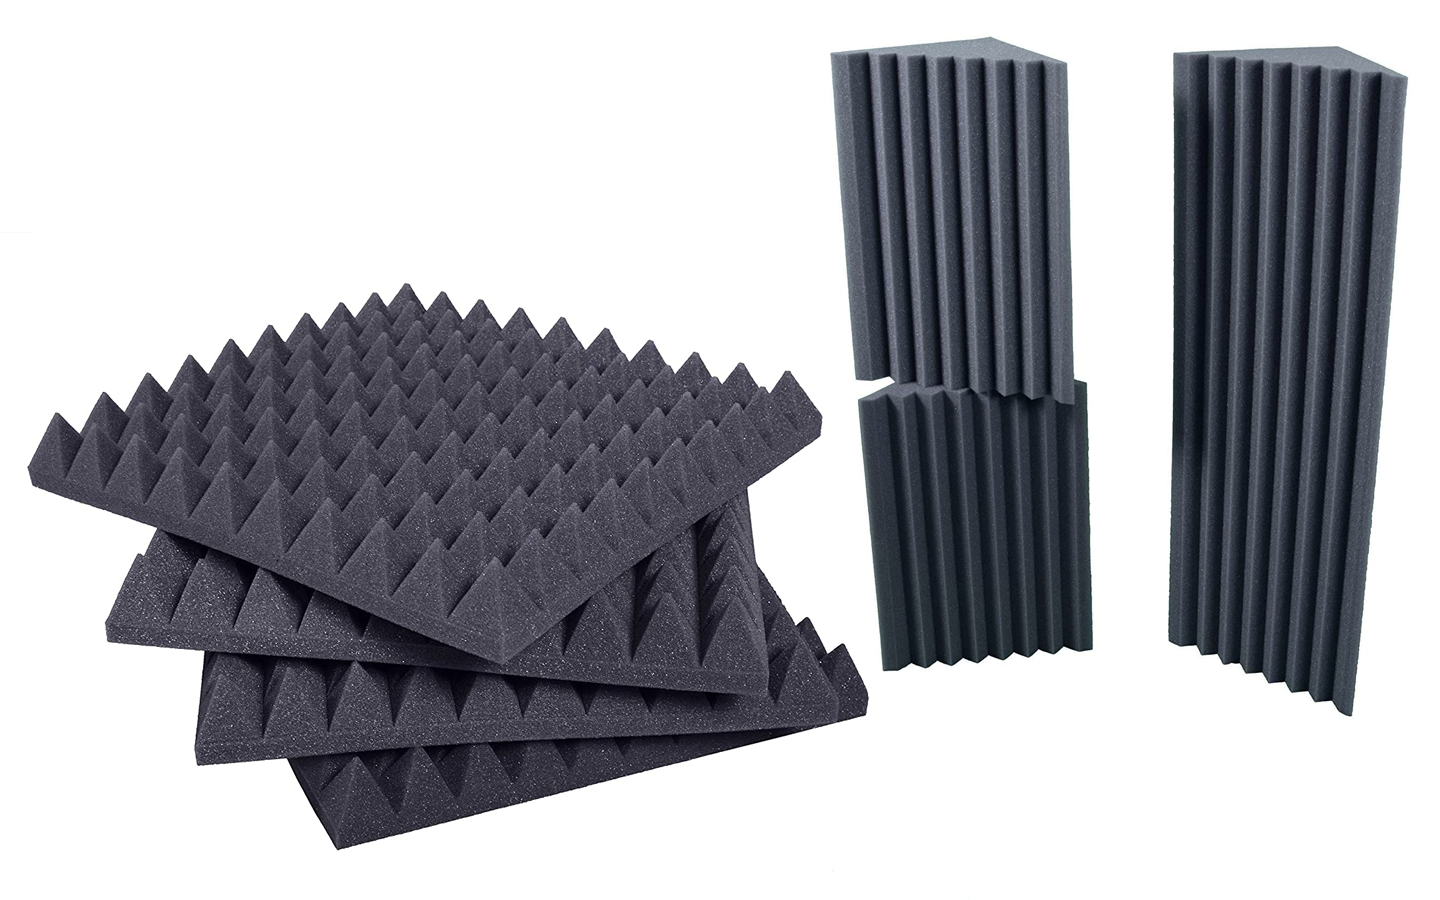 Sound absorbing panels and bass traps